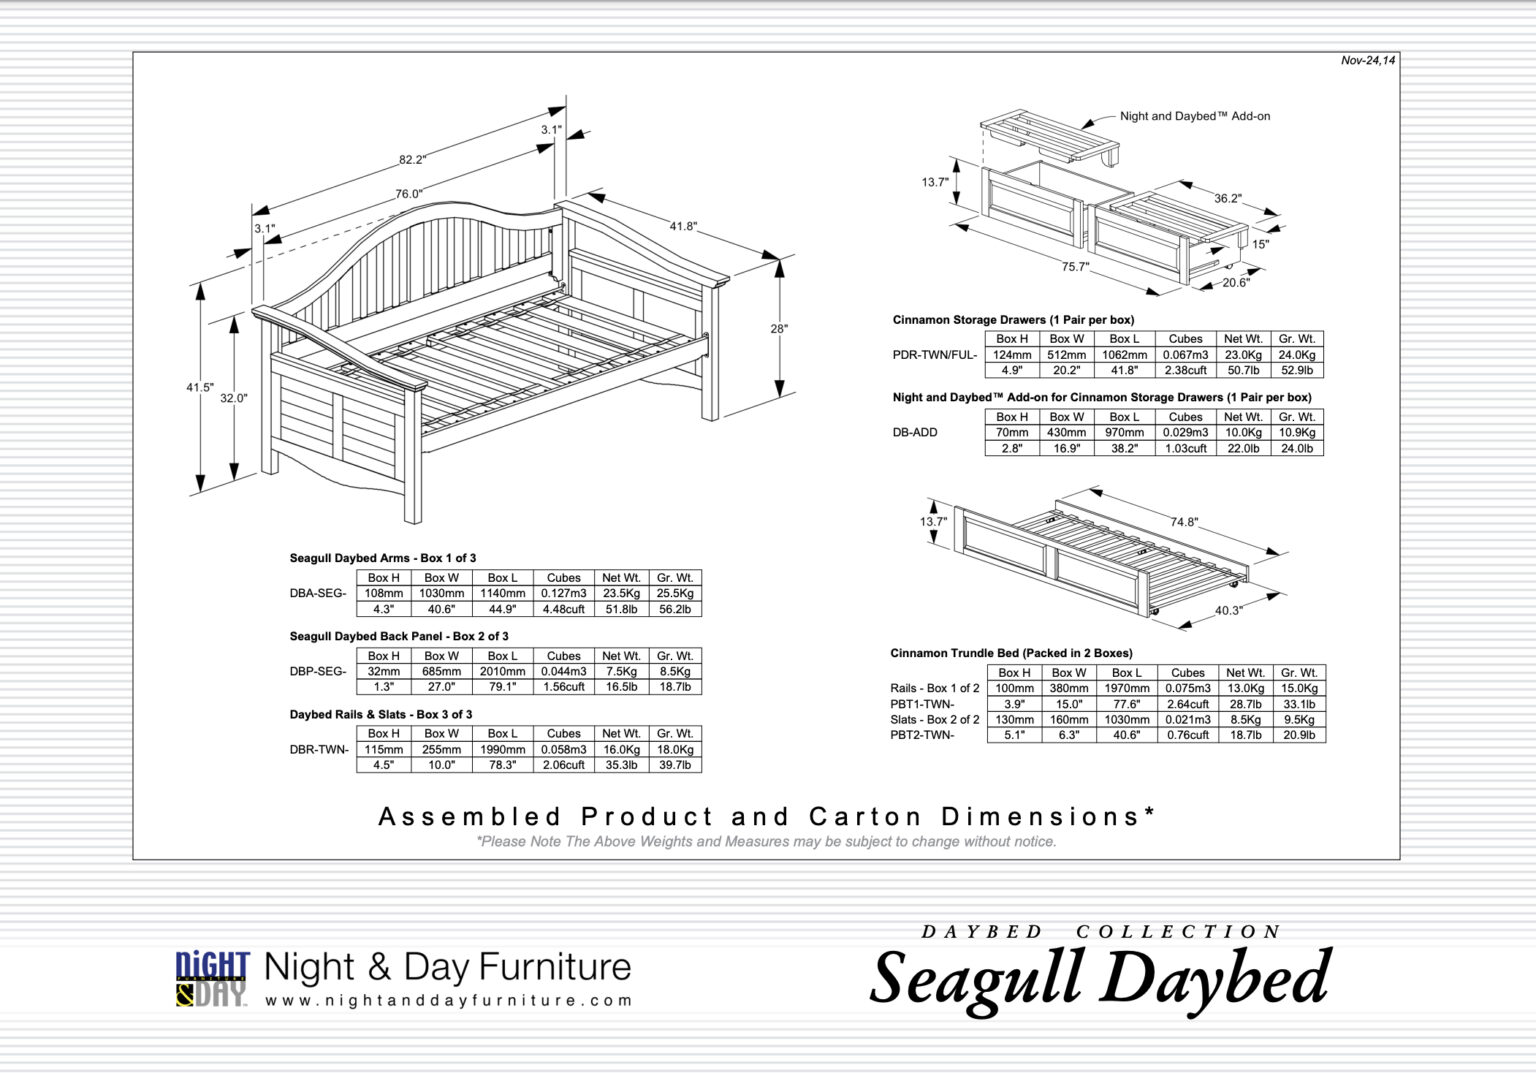 Seagull-Daybe-Dimensions_Night-&-Day